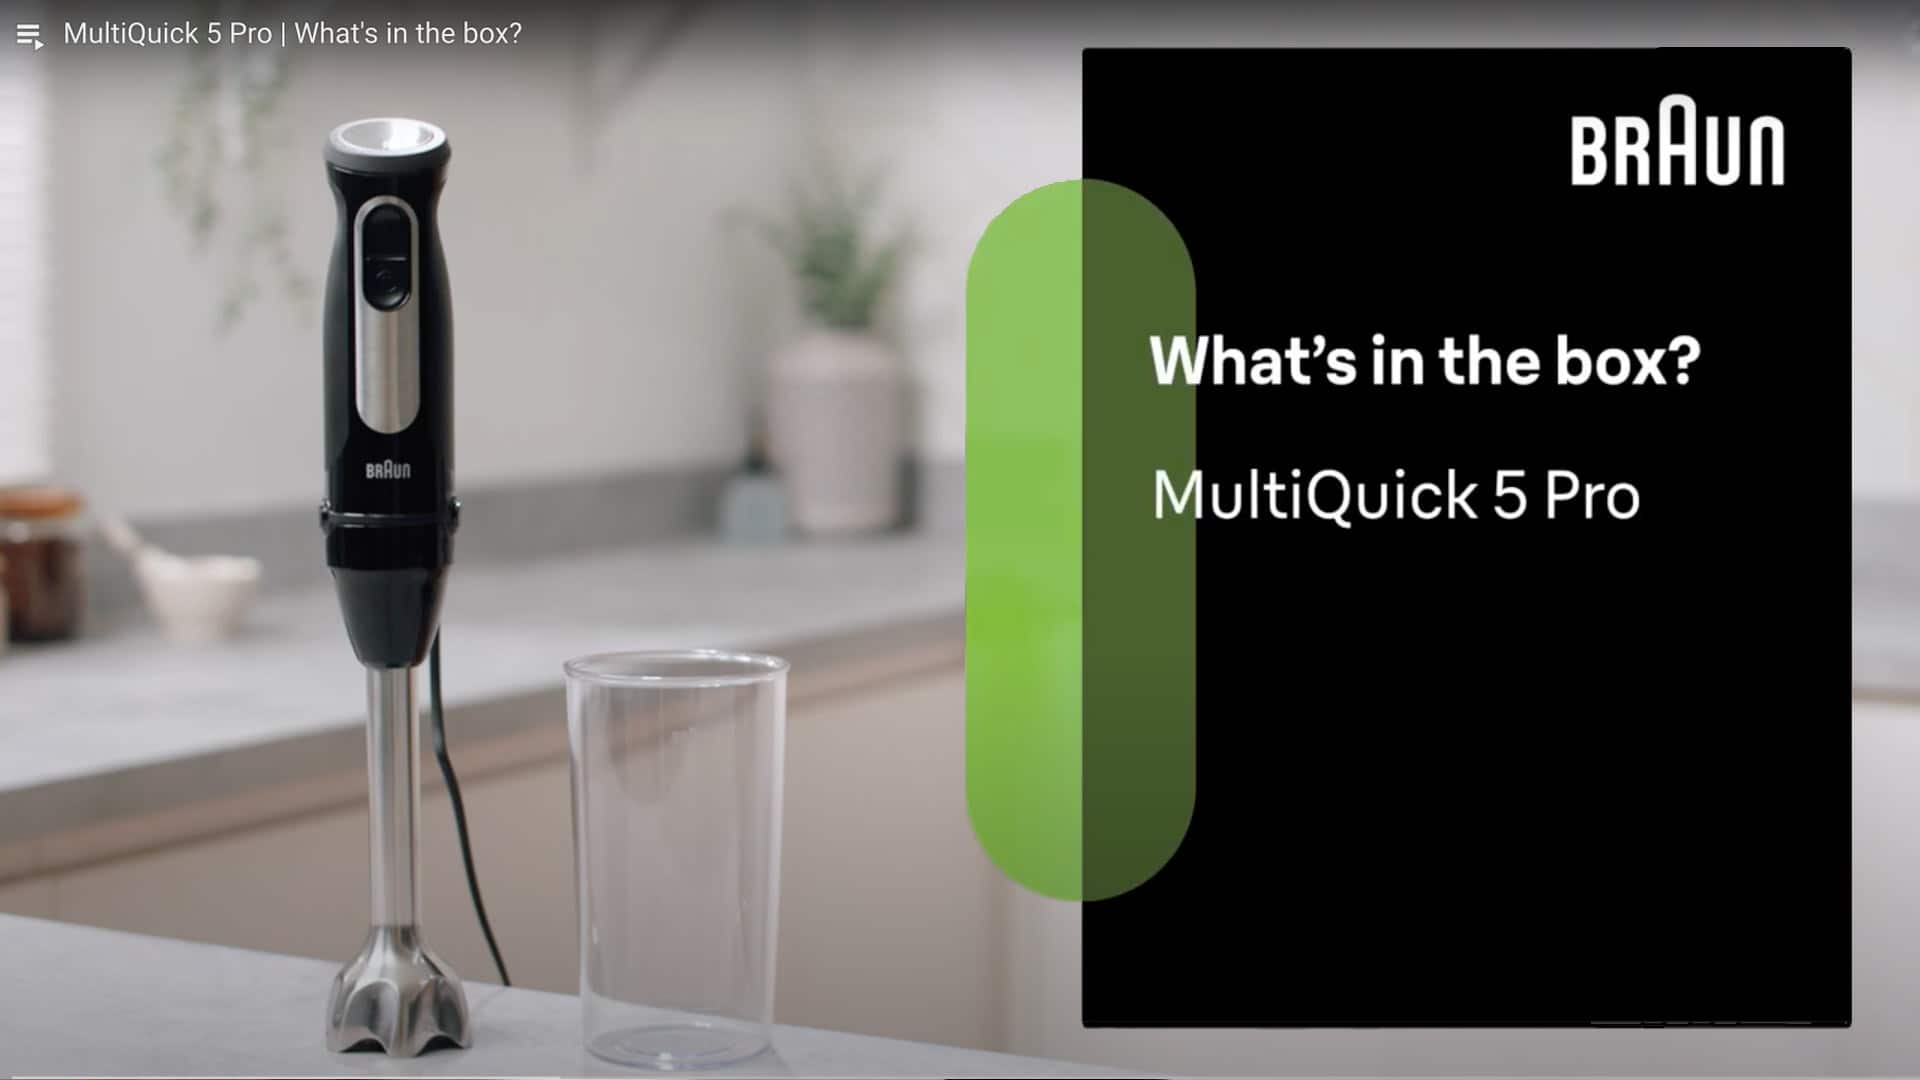 Braun MultiQuick 5 Pro - Whats in the box